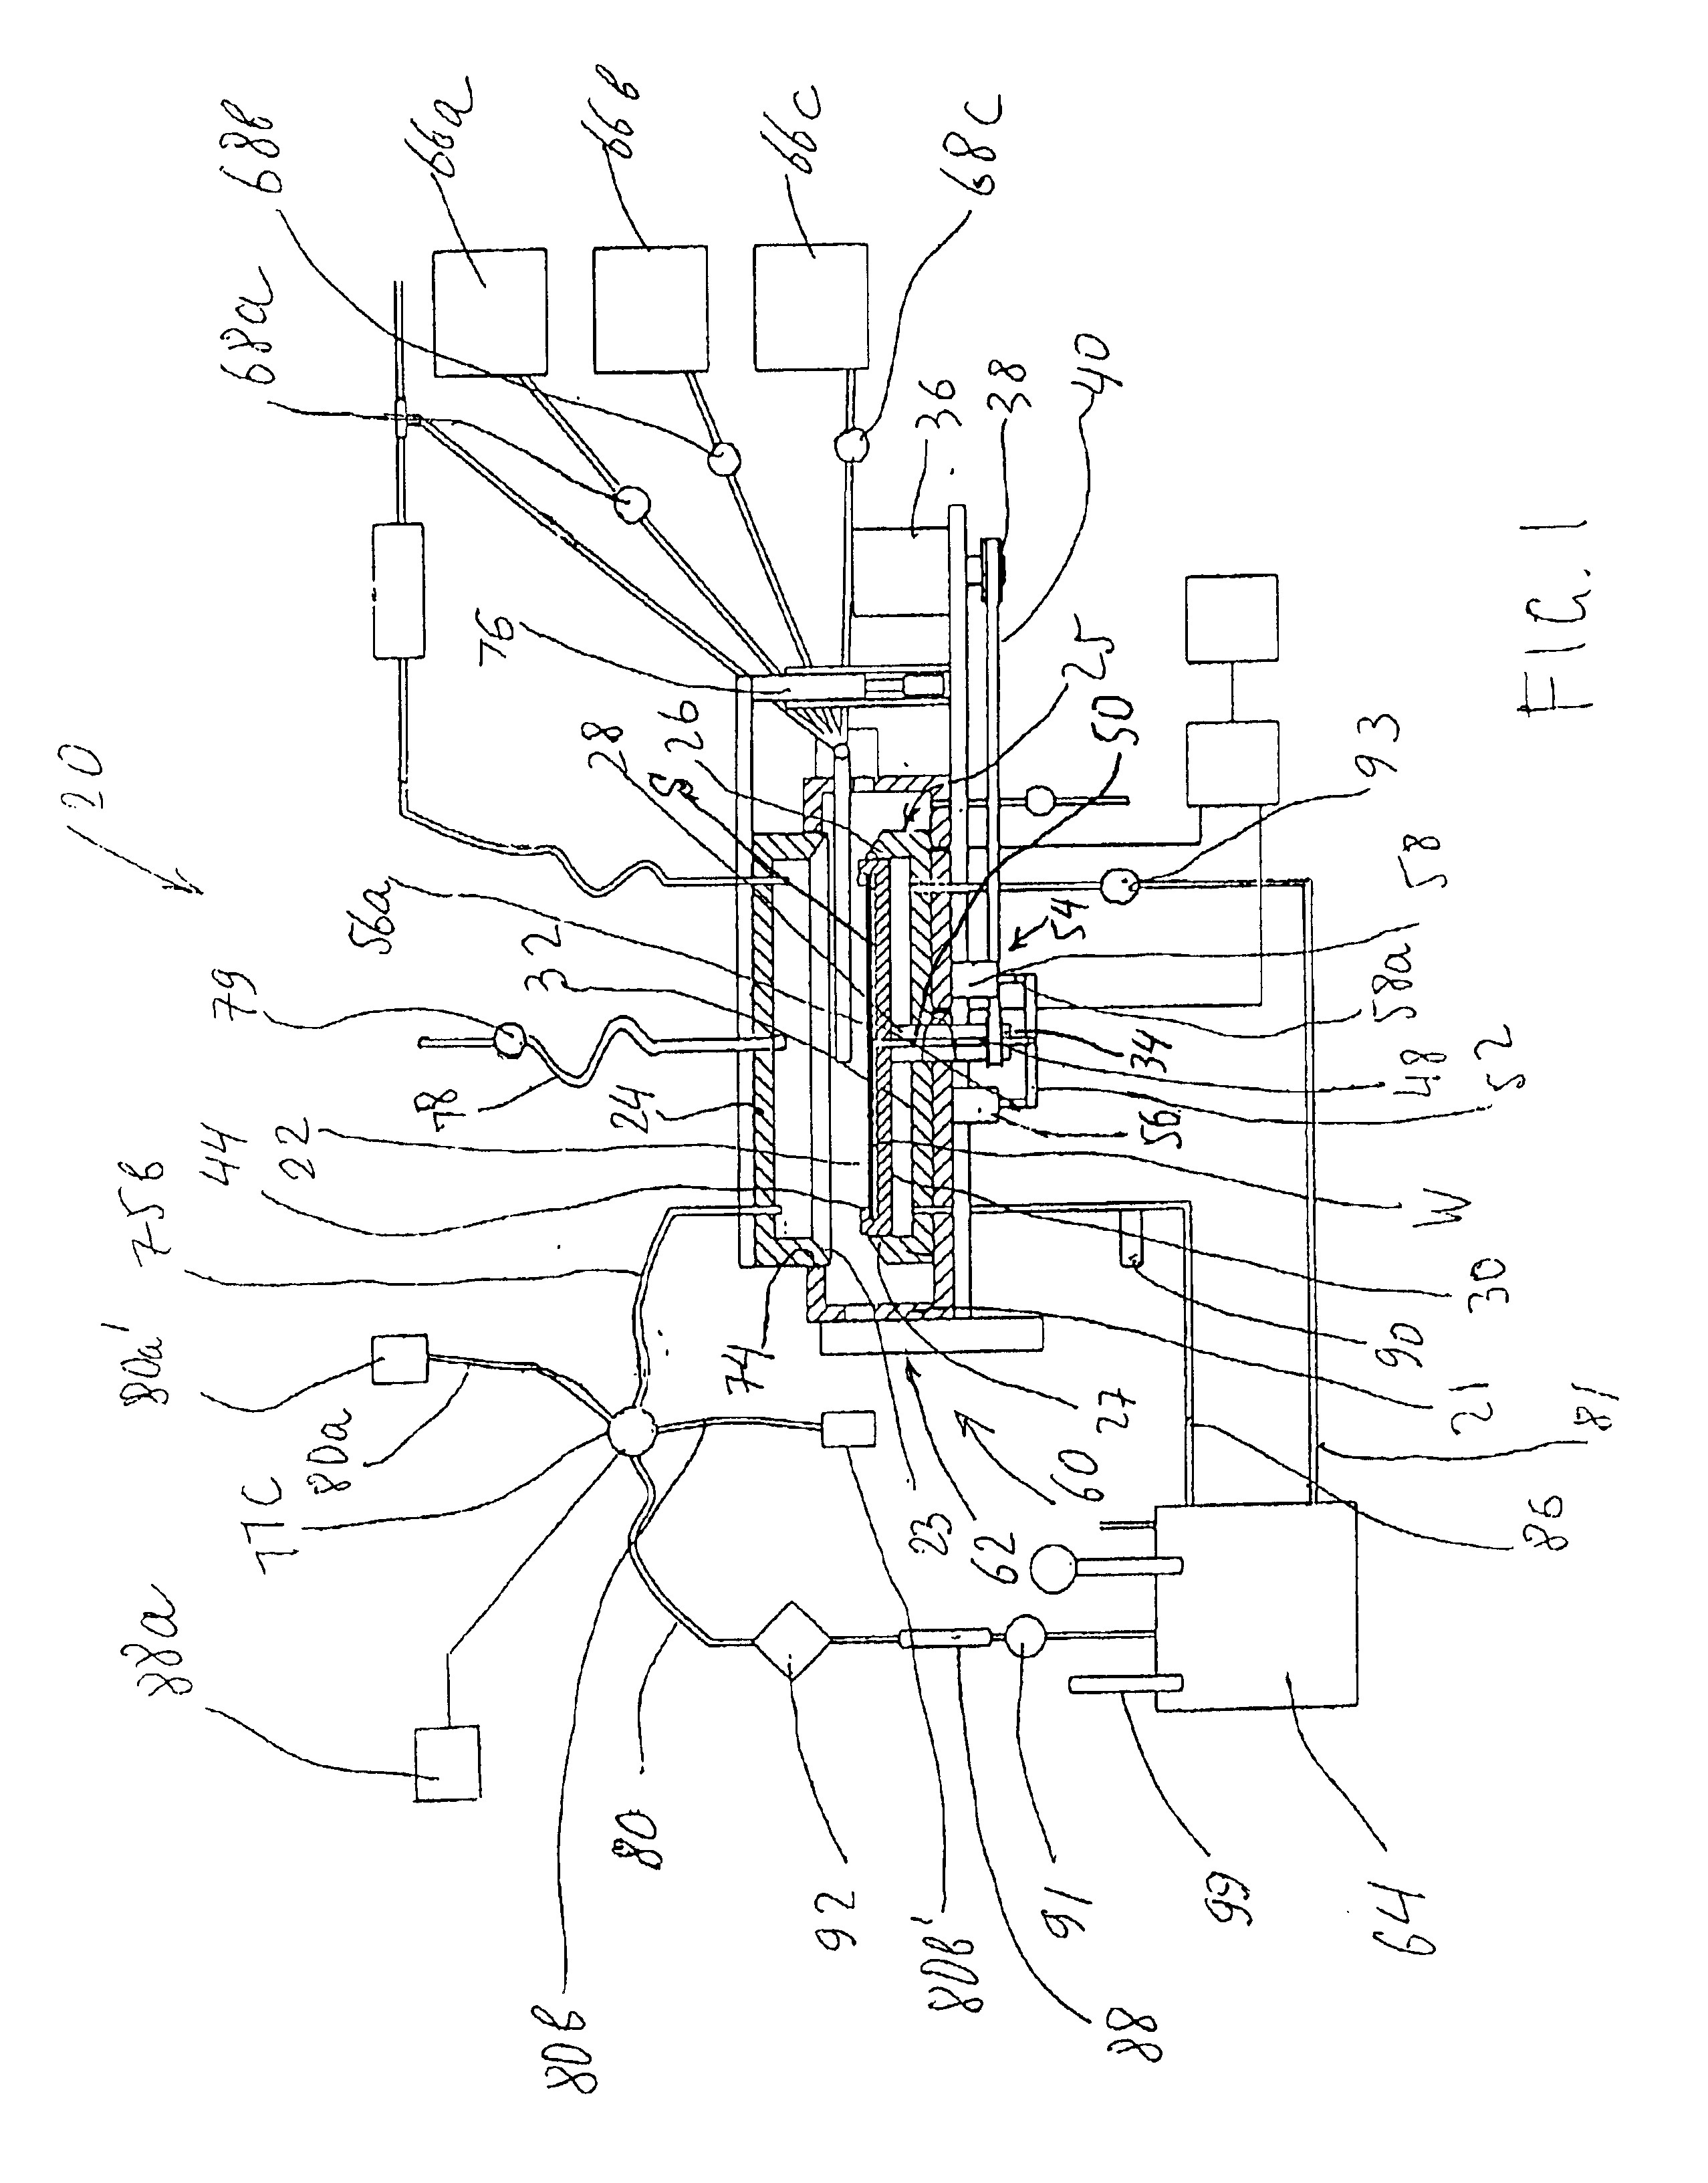 Method and apparatus for electroless deposition with temperature-controlled chuck